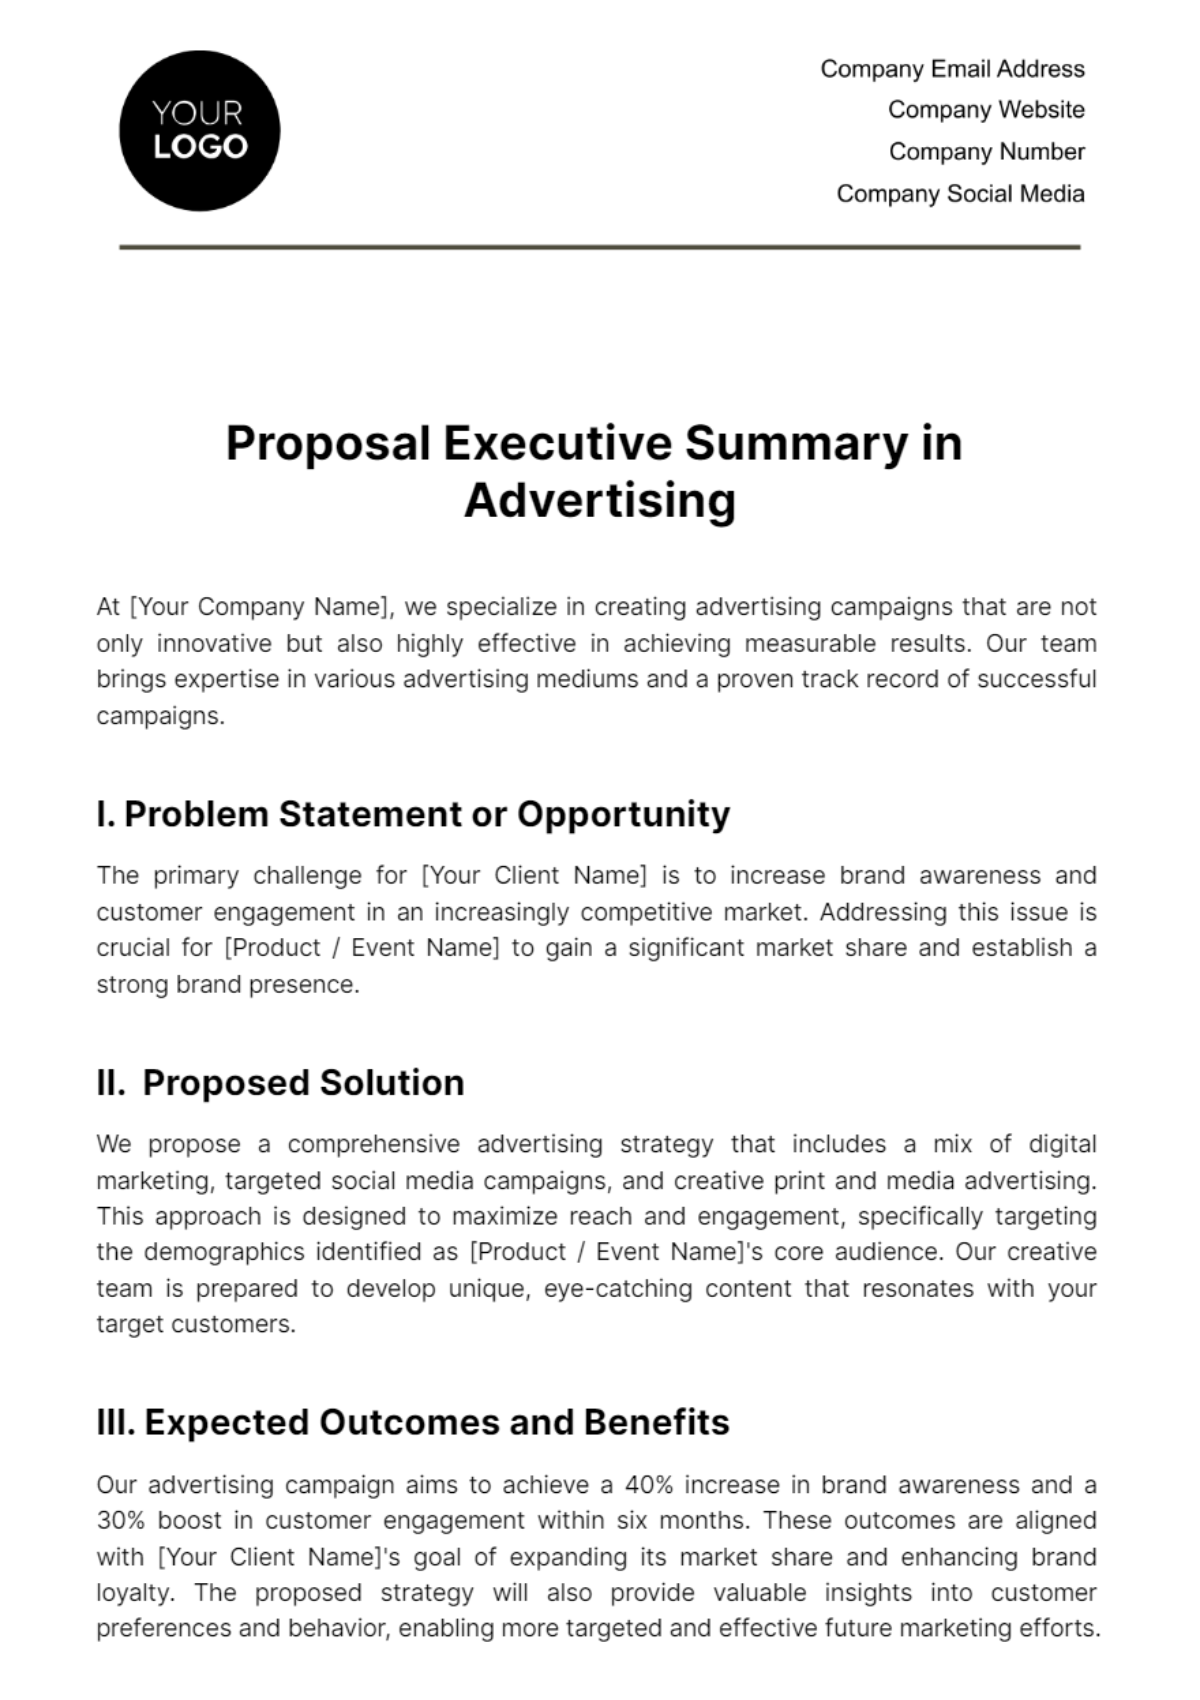 Proposal Executive Summary in Advertising Template